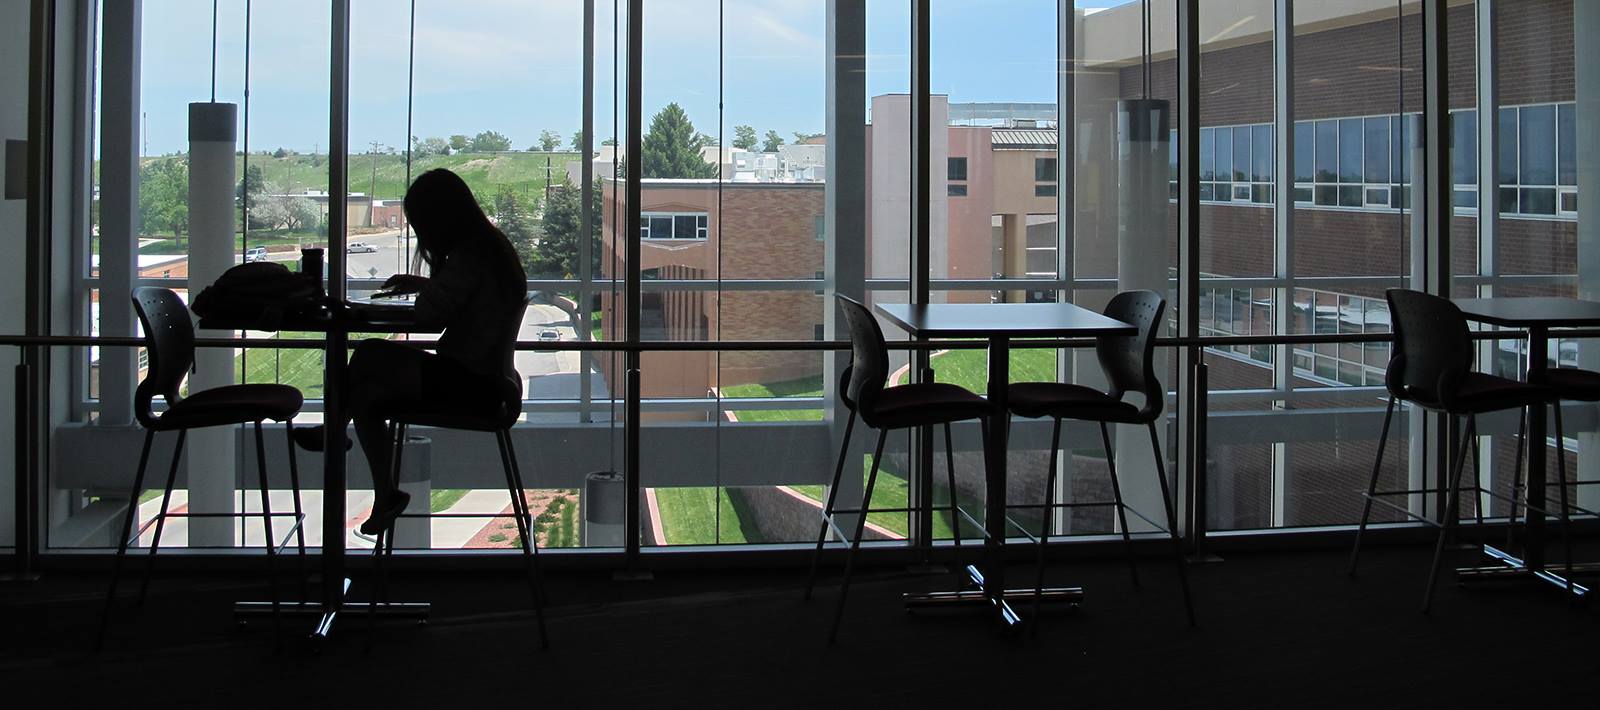 photo of a student studying, backlit